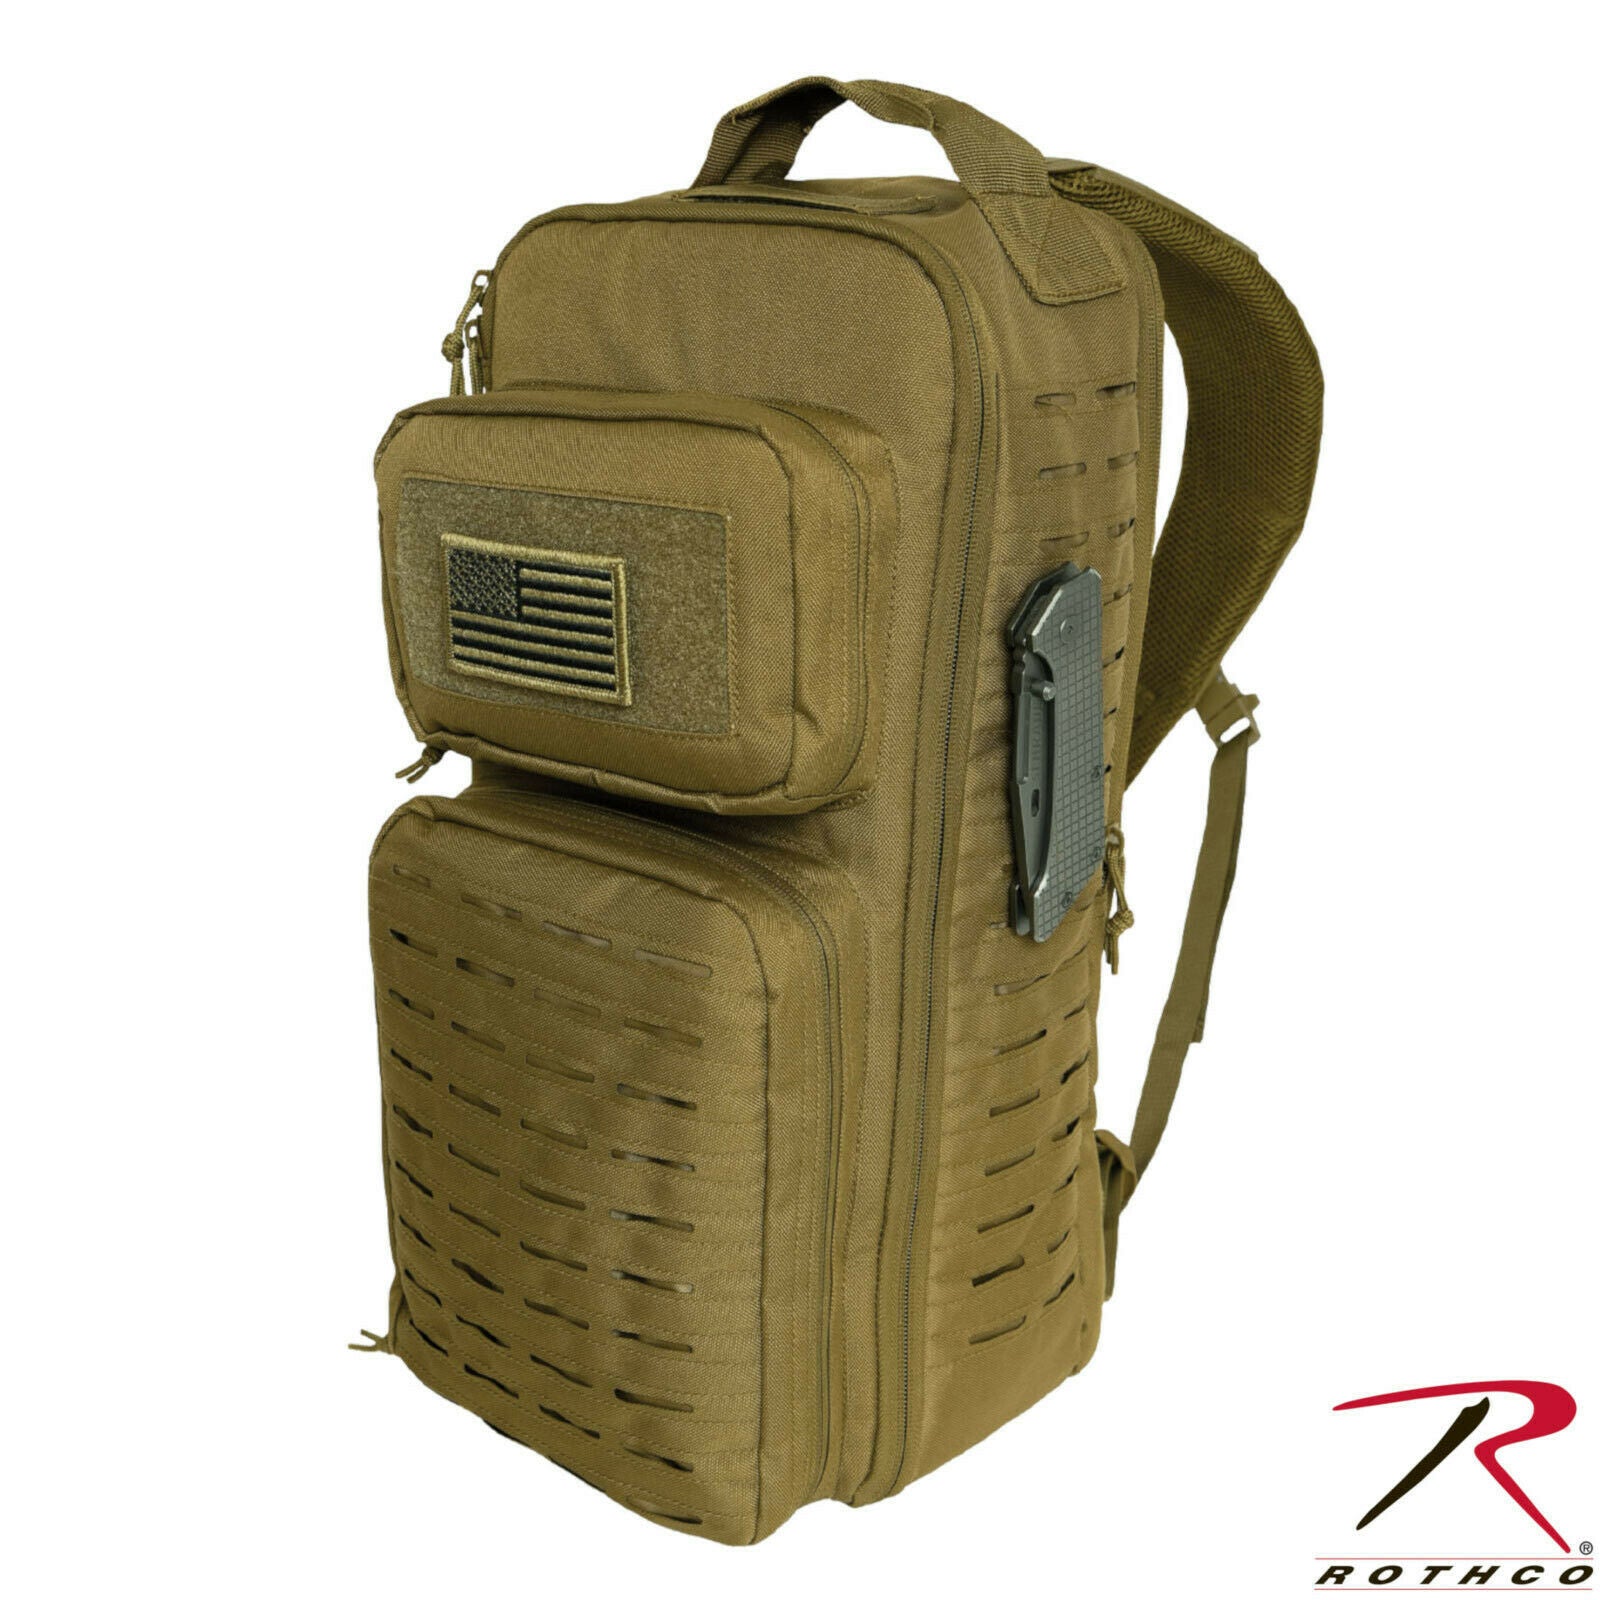 Rothco Tactical Single Sling Backpack With Laser Cut MOLLE Black or Co – Grunt Force